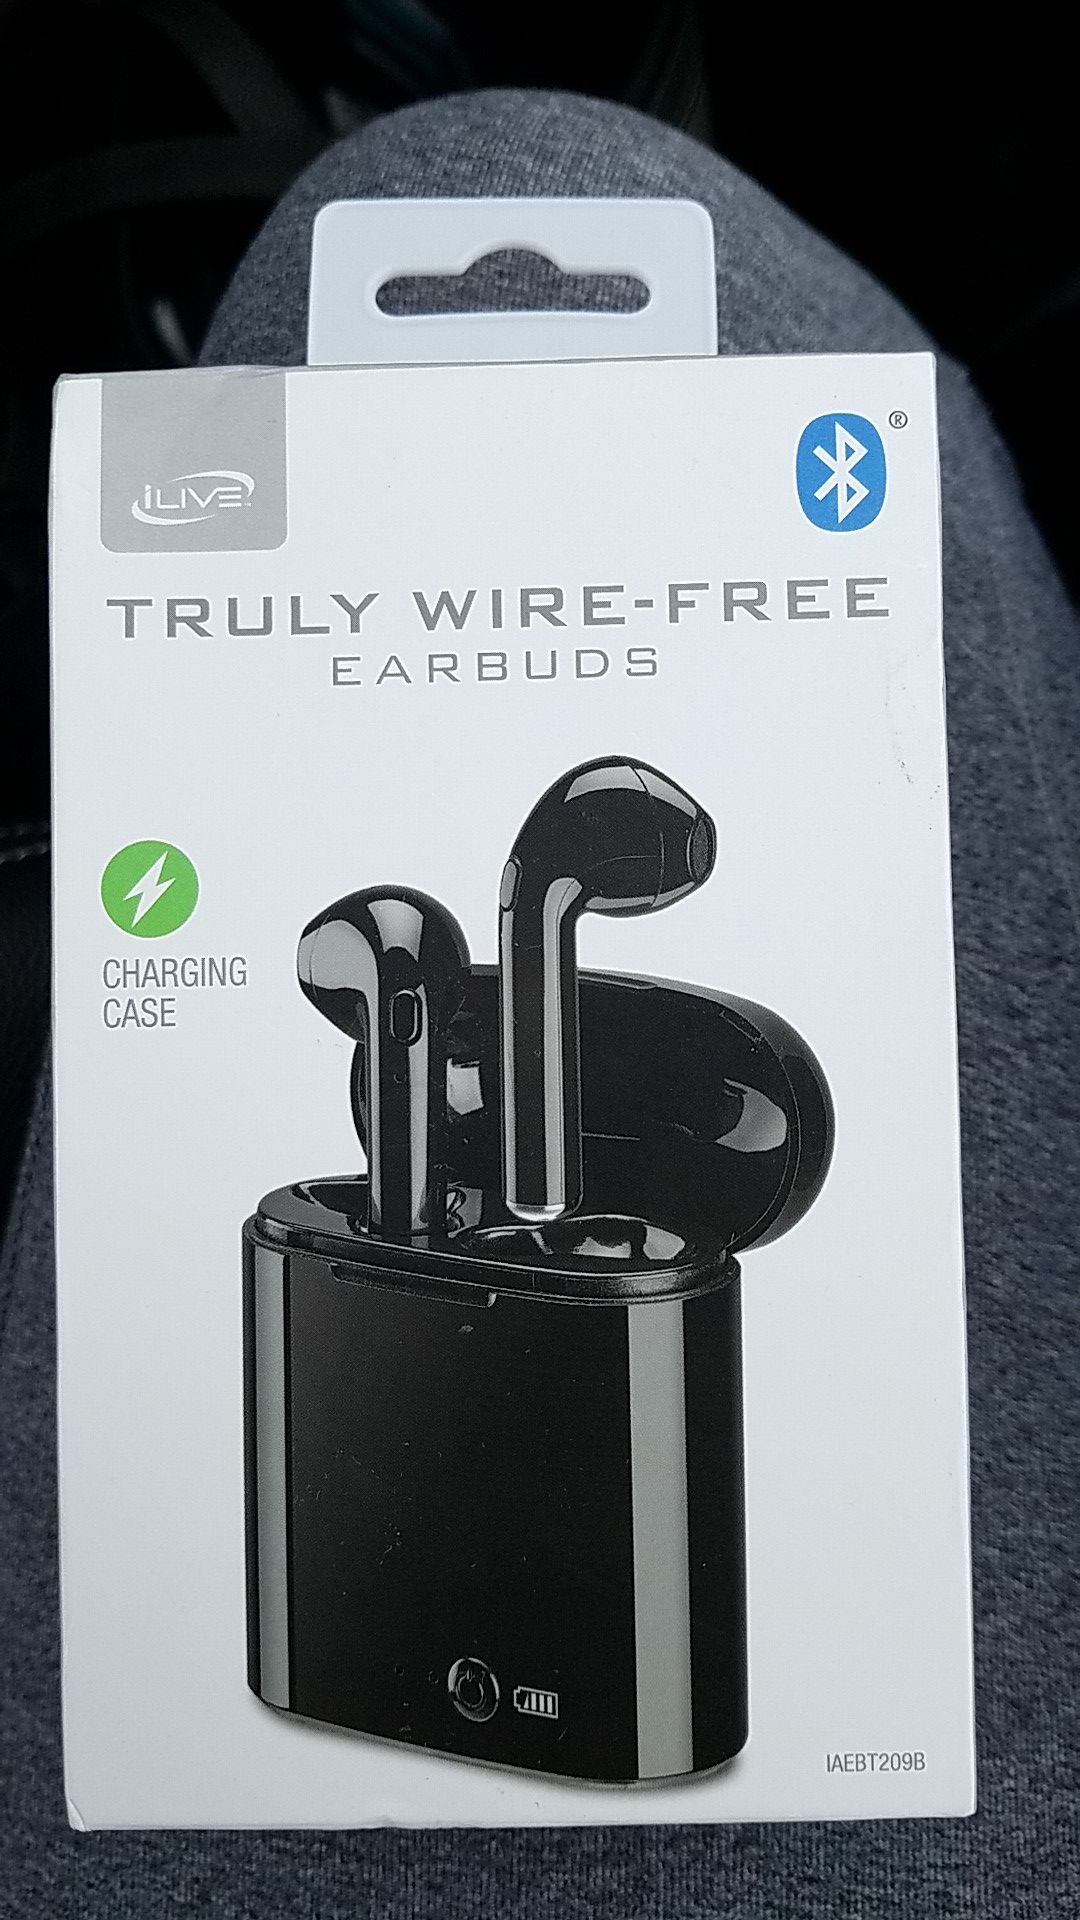 ILive Truly Wire Free earbuds